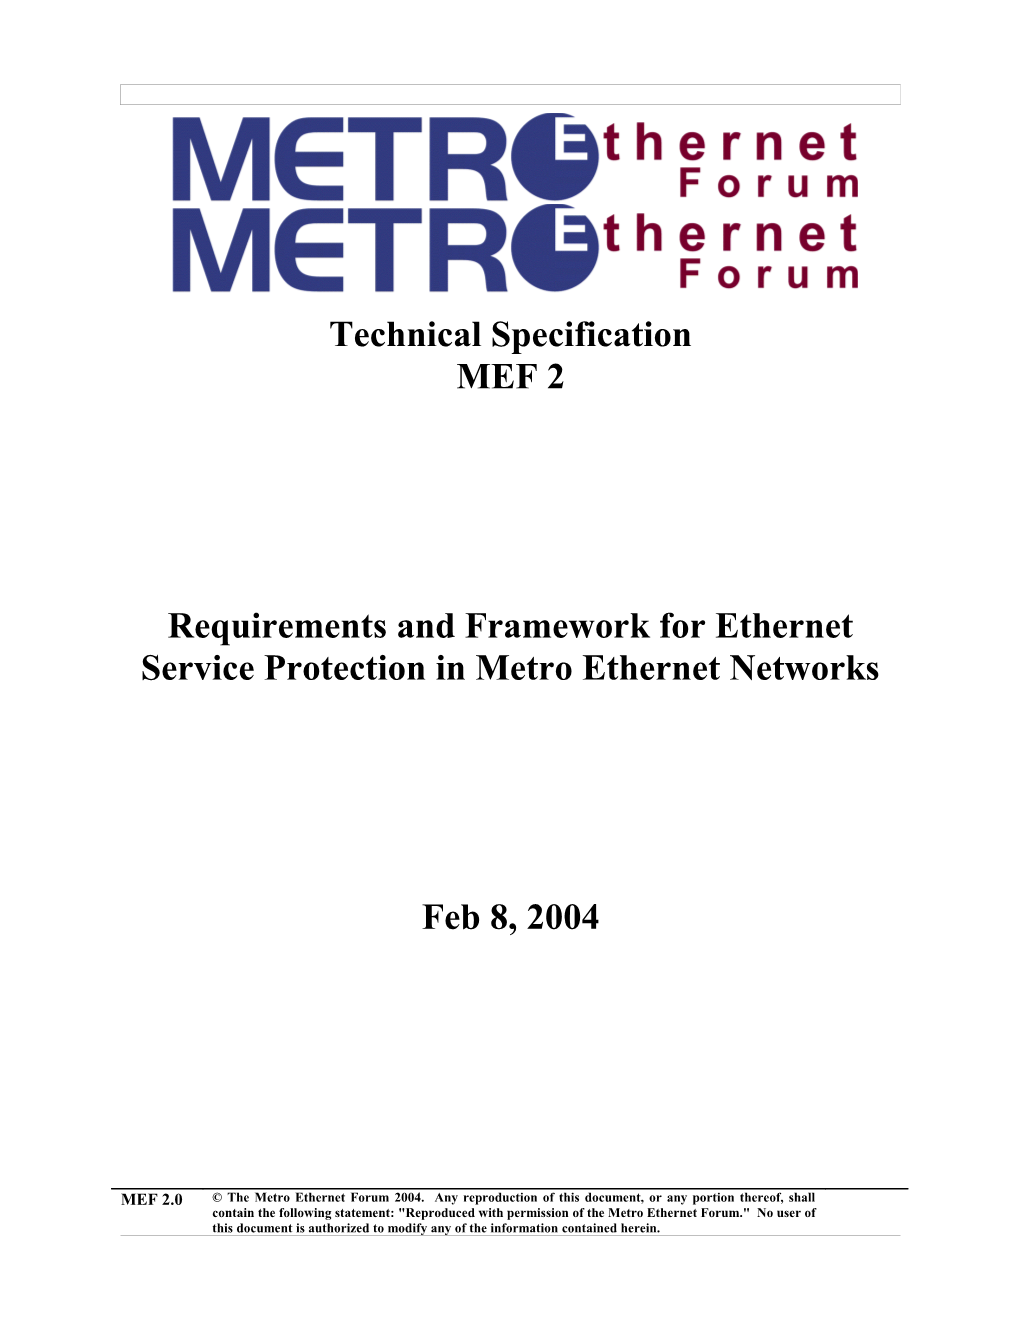 MEF Protection Requirements and Framework